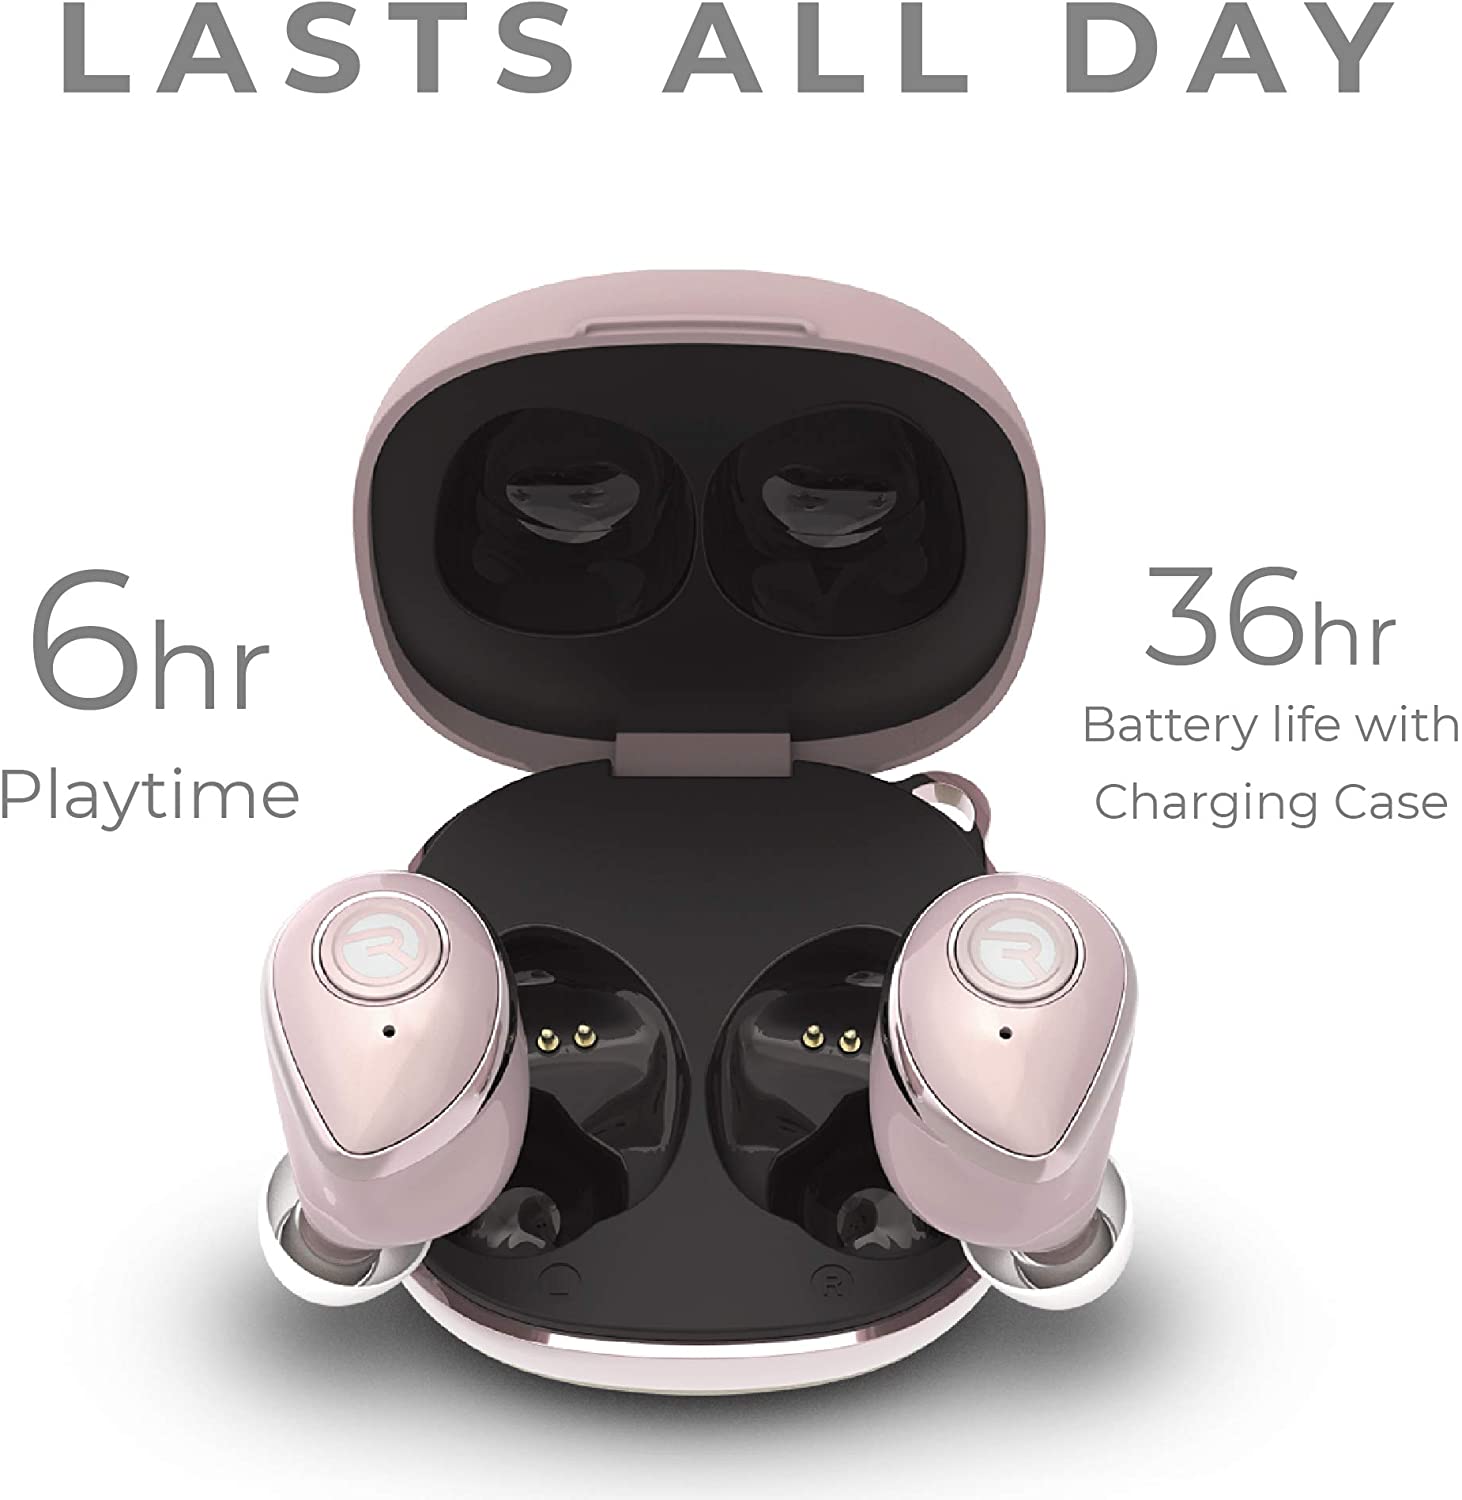 Raycon E50 Wireless Earbuds Headphones + Case Rose Gold- Certified Refurbished